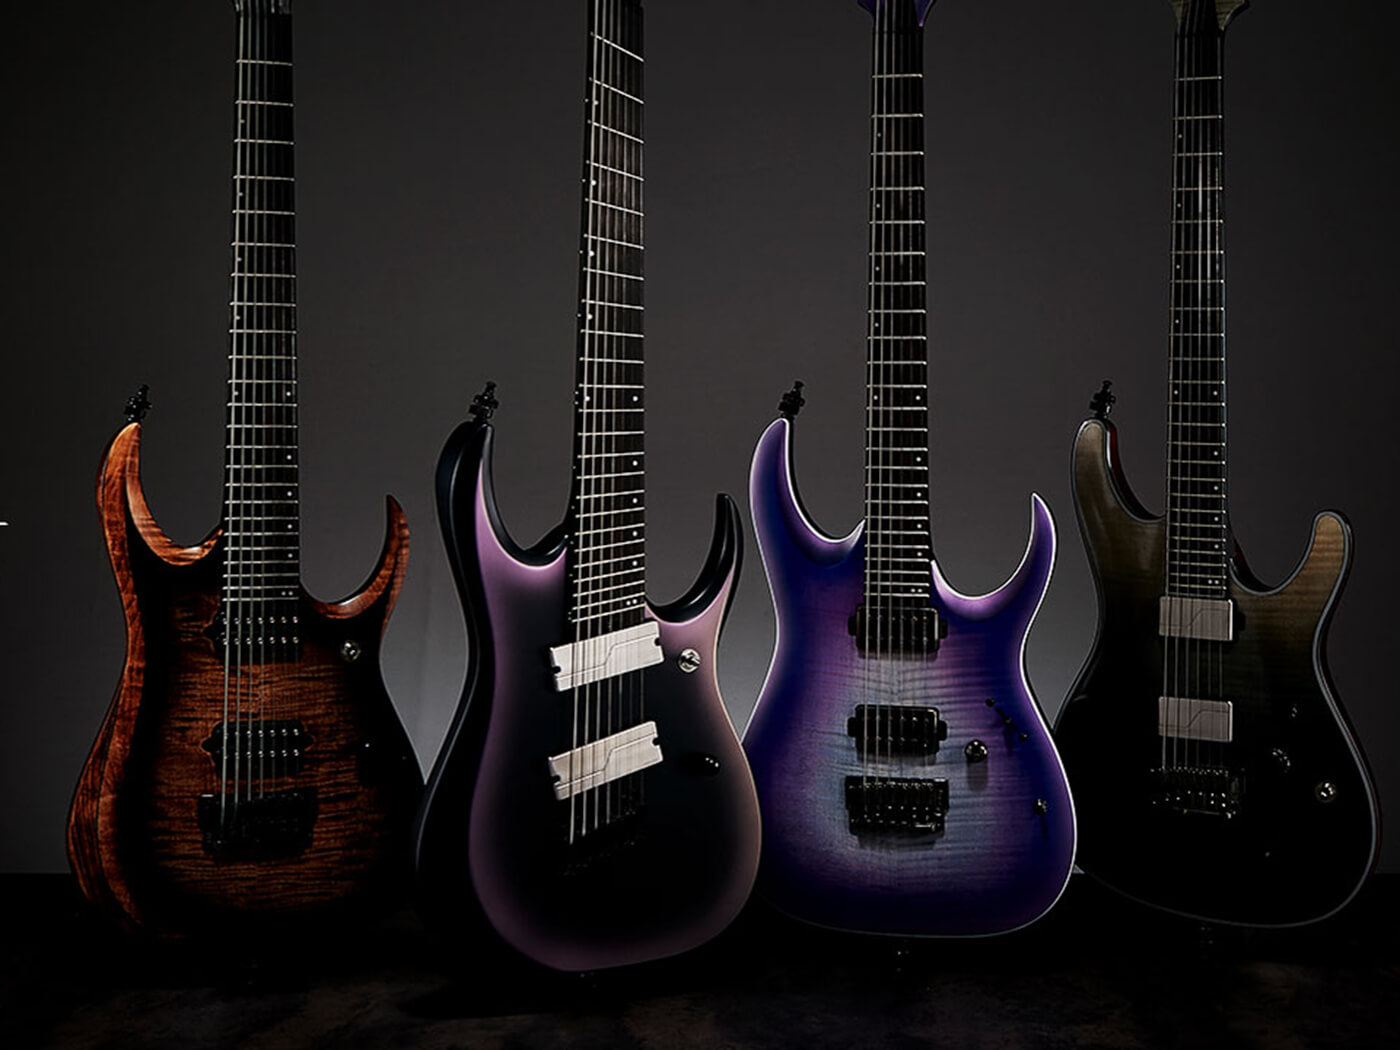 NAMM 2019: Ibanez unveils new Axion label and signature models